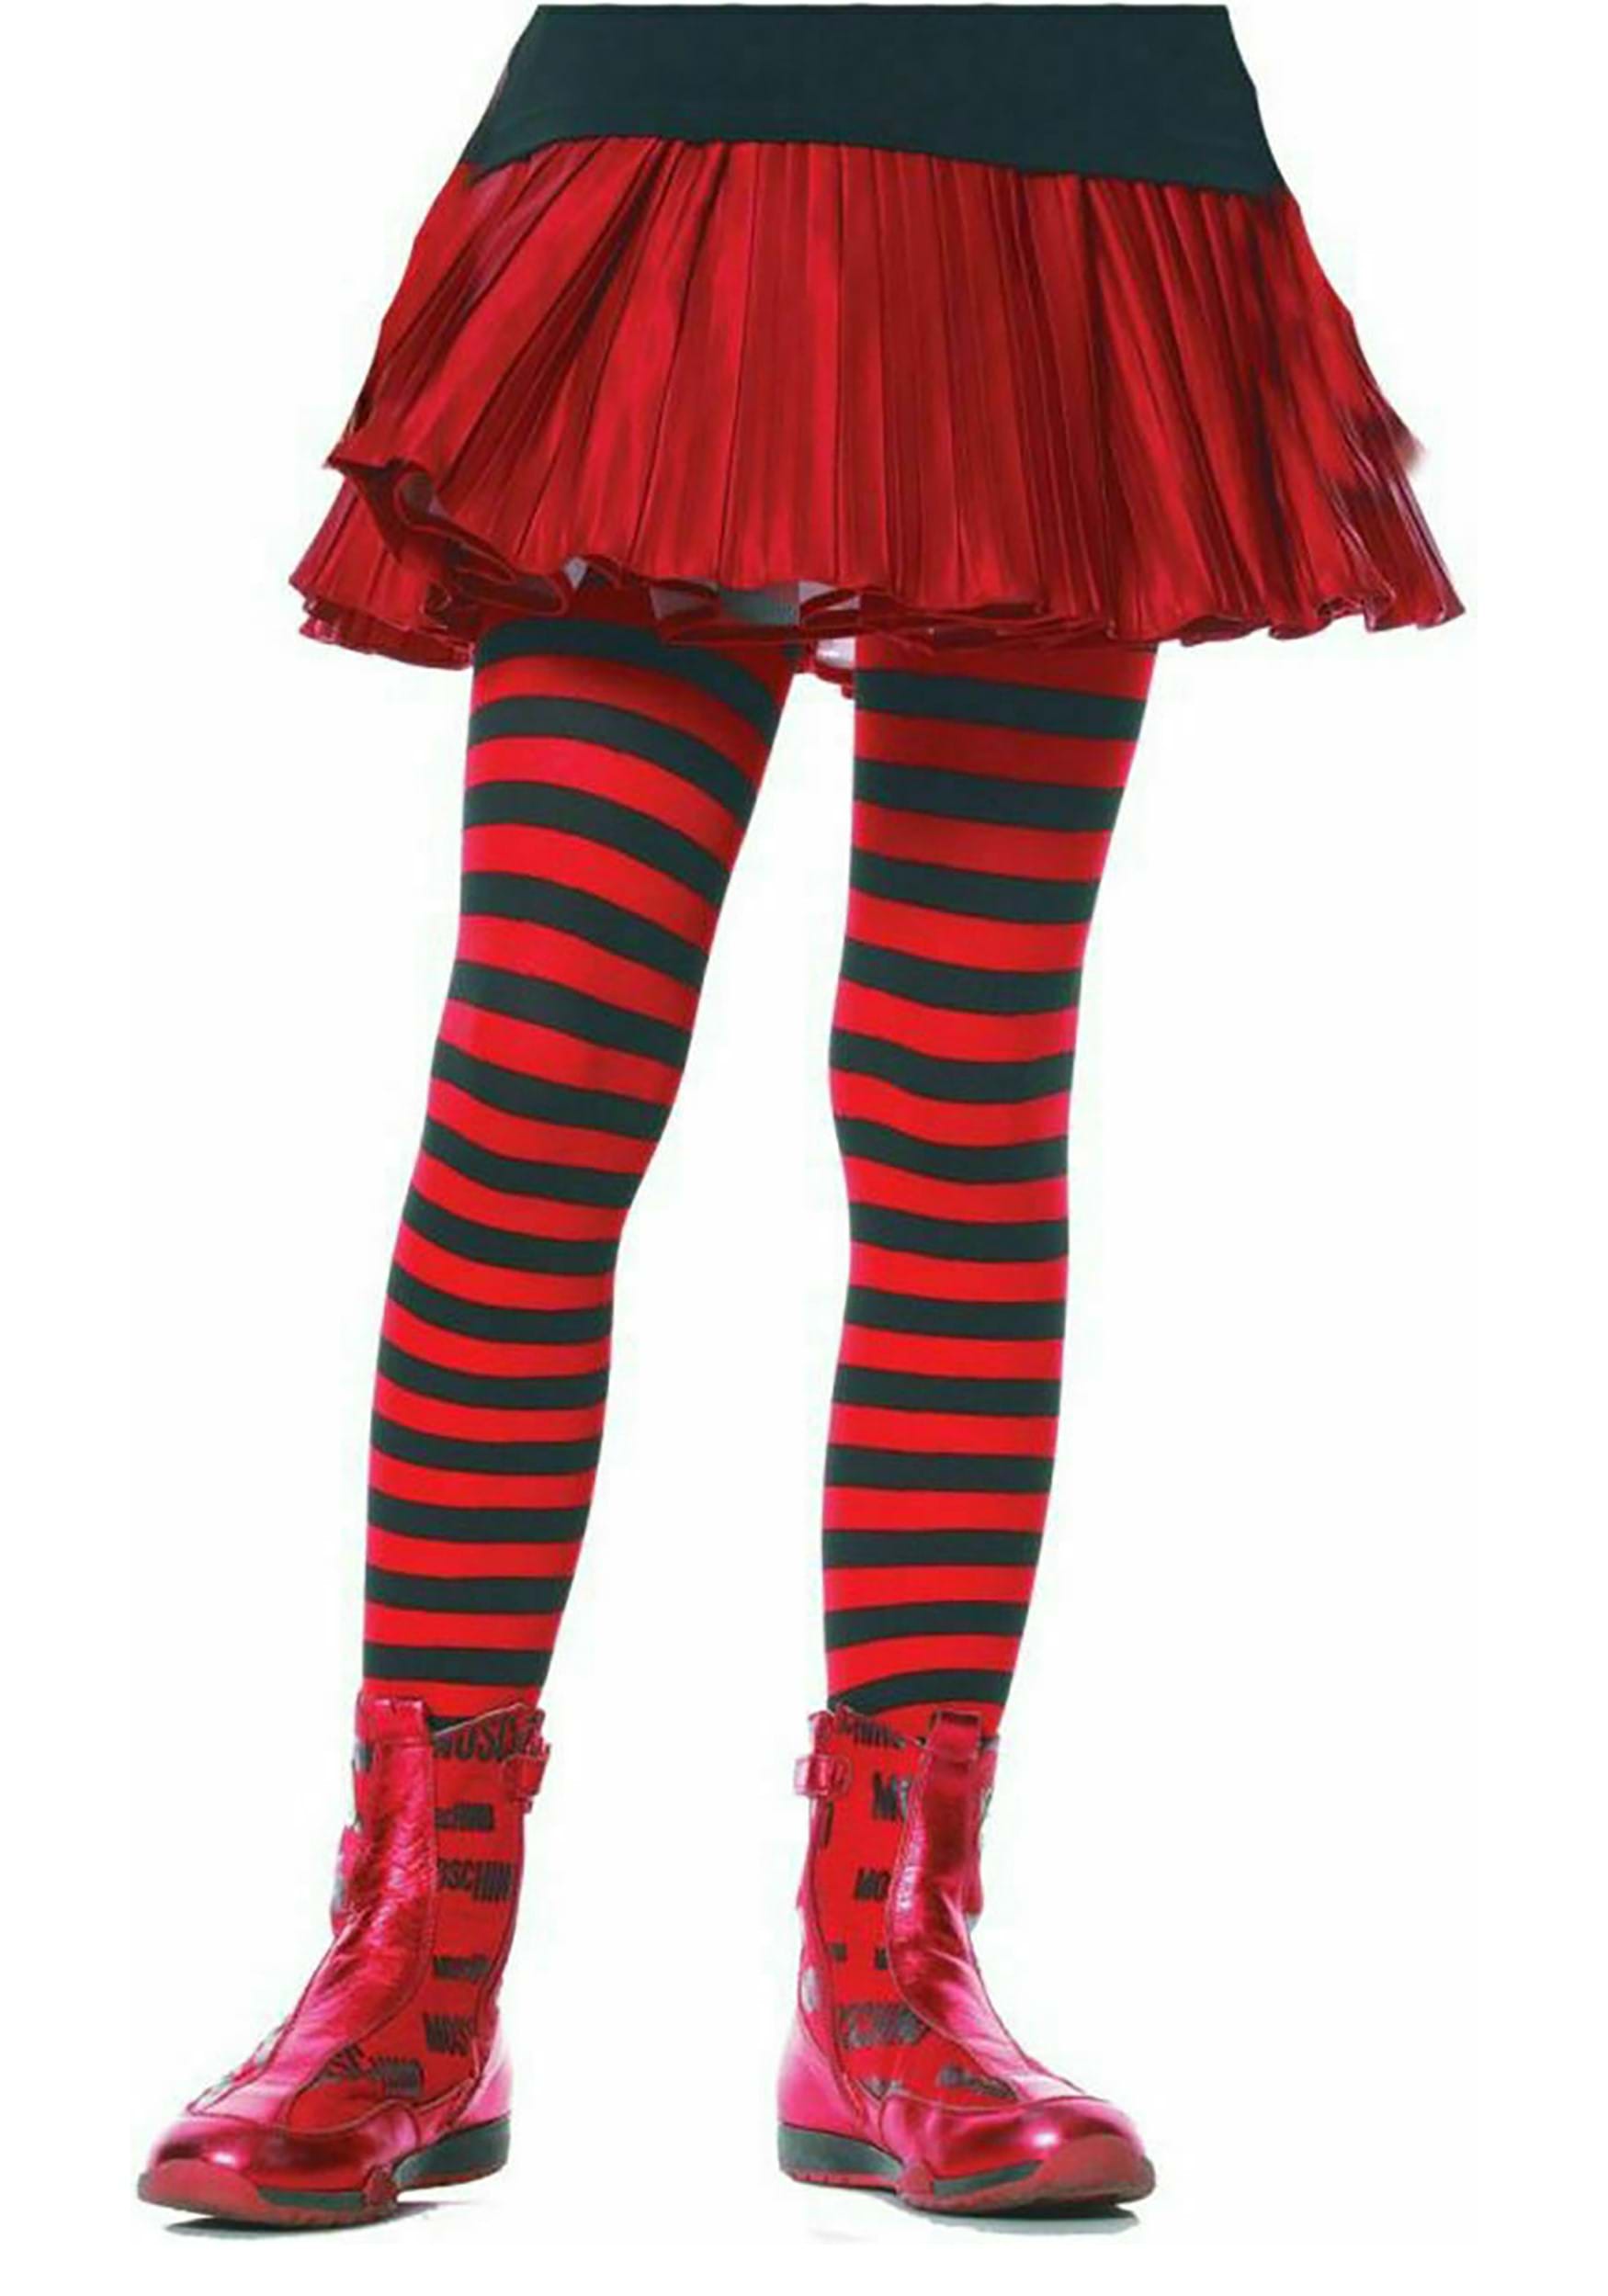 Kids Black and Red Striped Tights